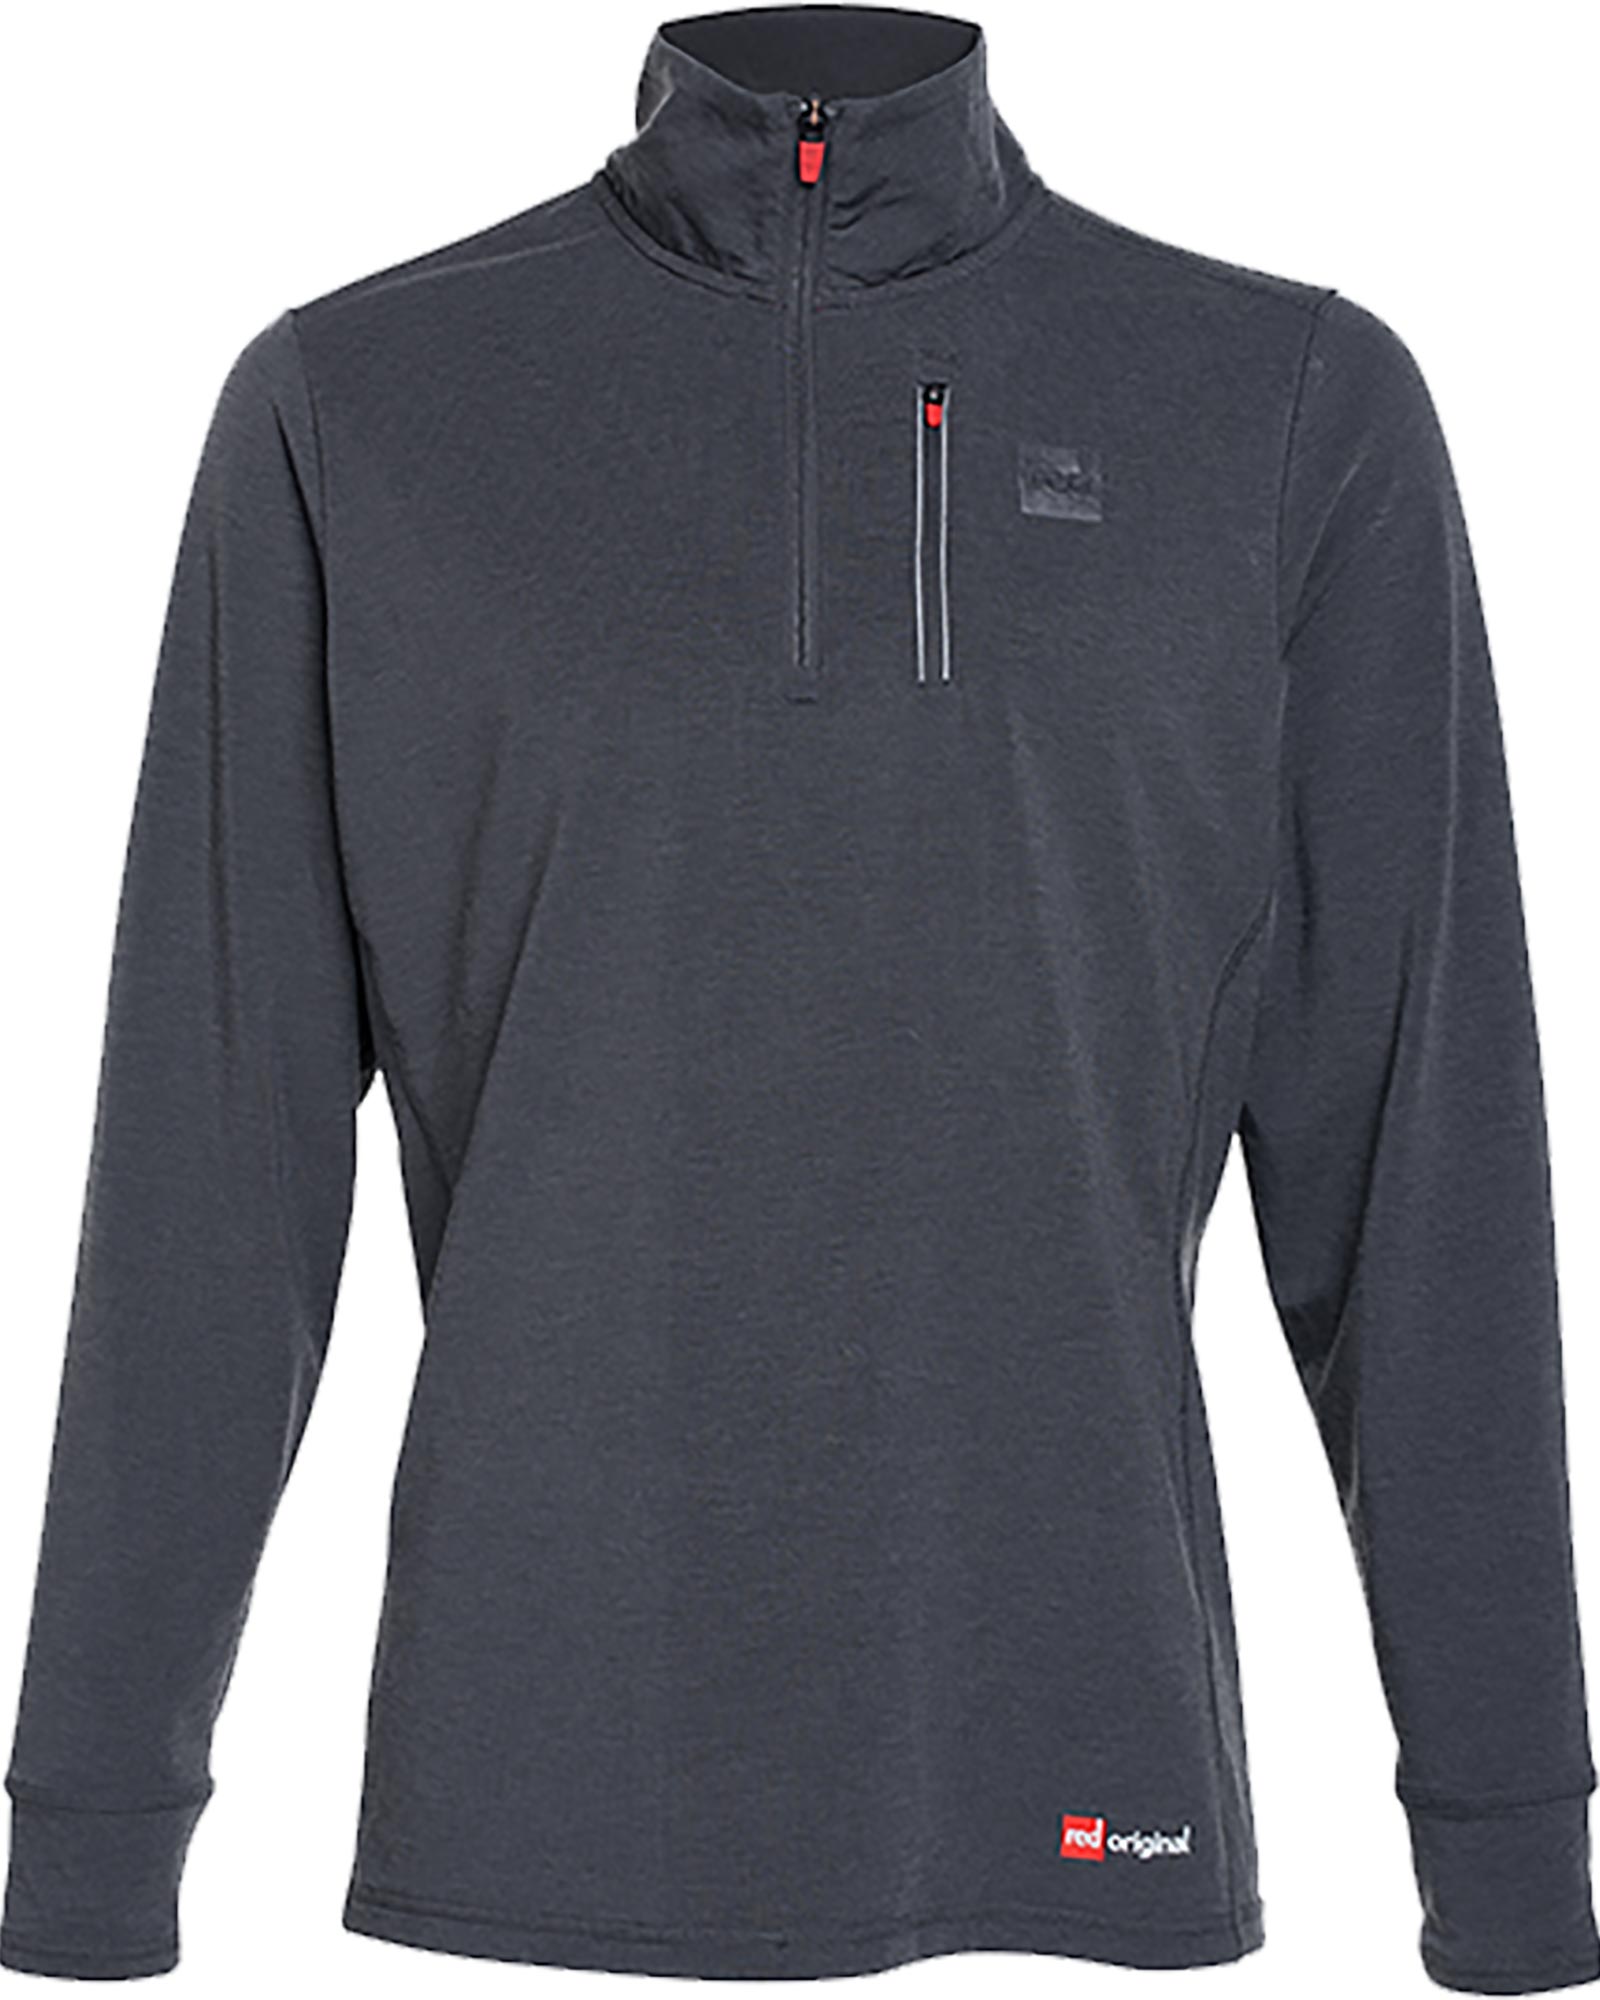 Red Performance Men’s Top Layer - Grey M